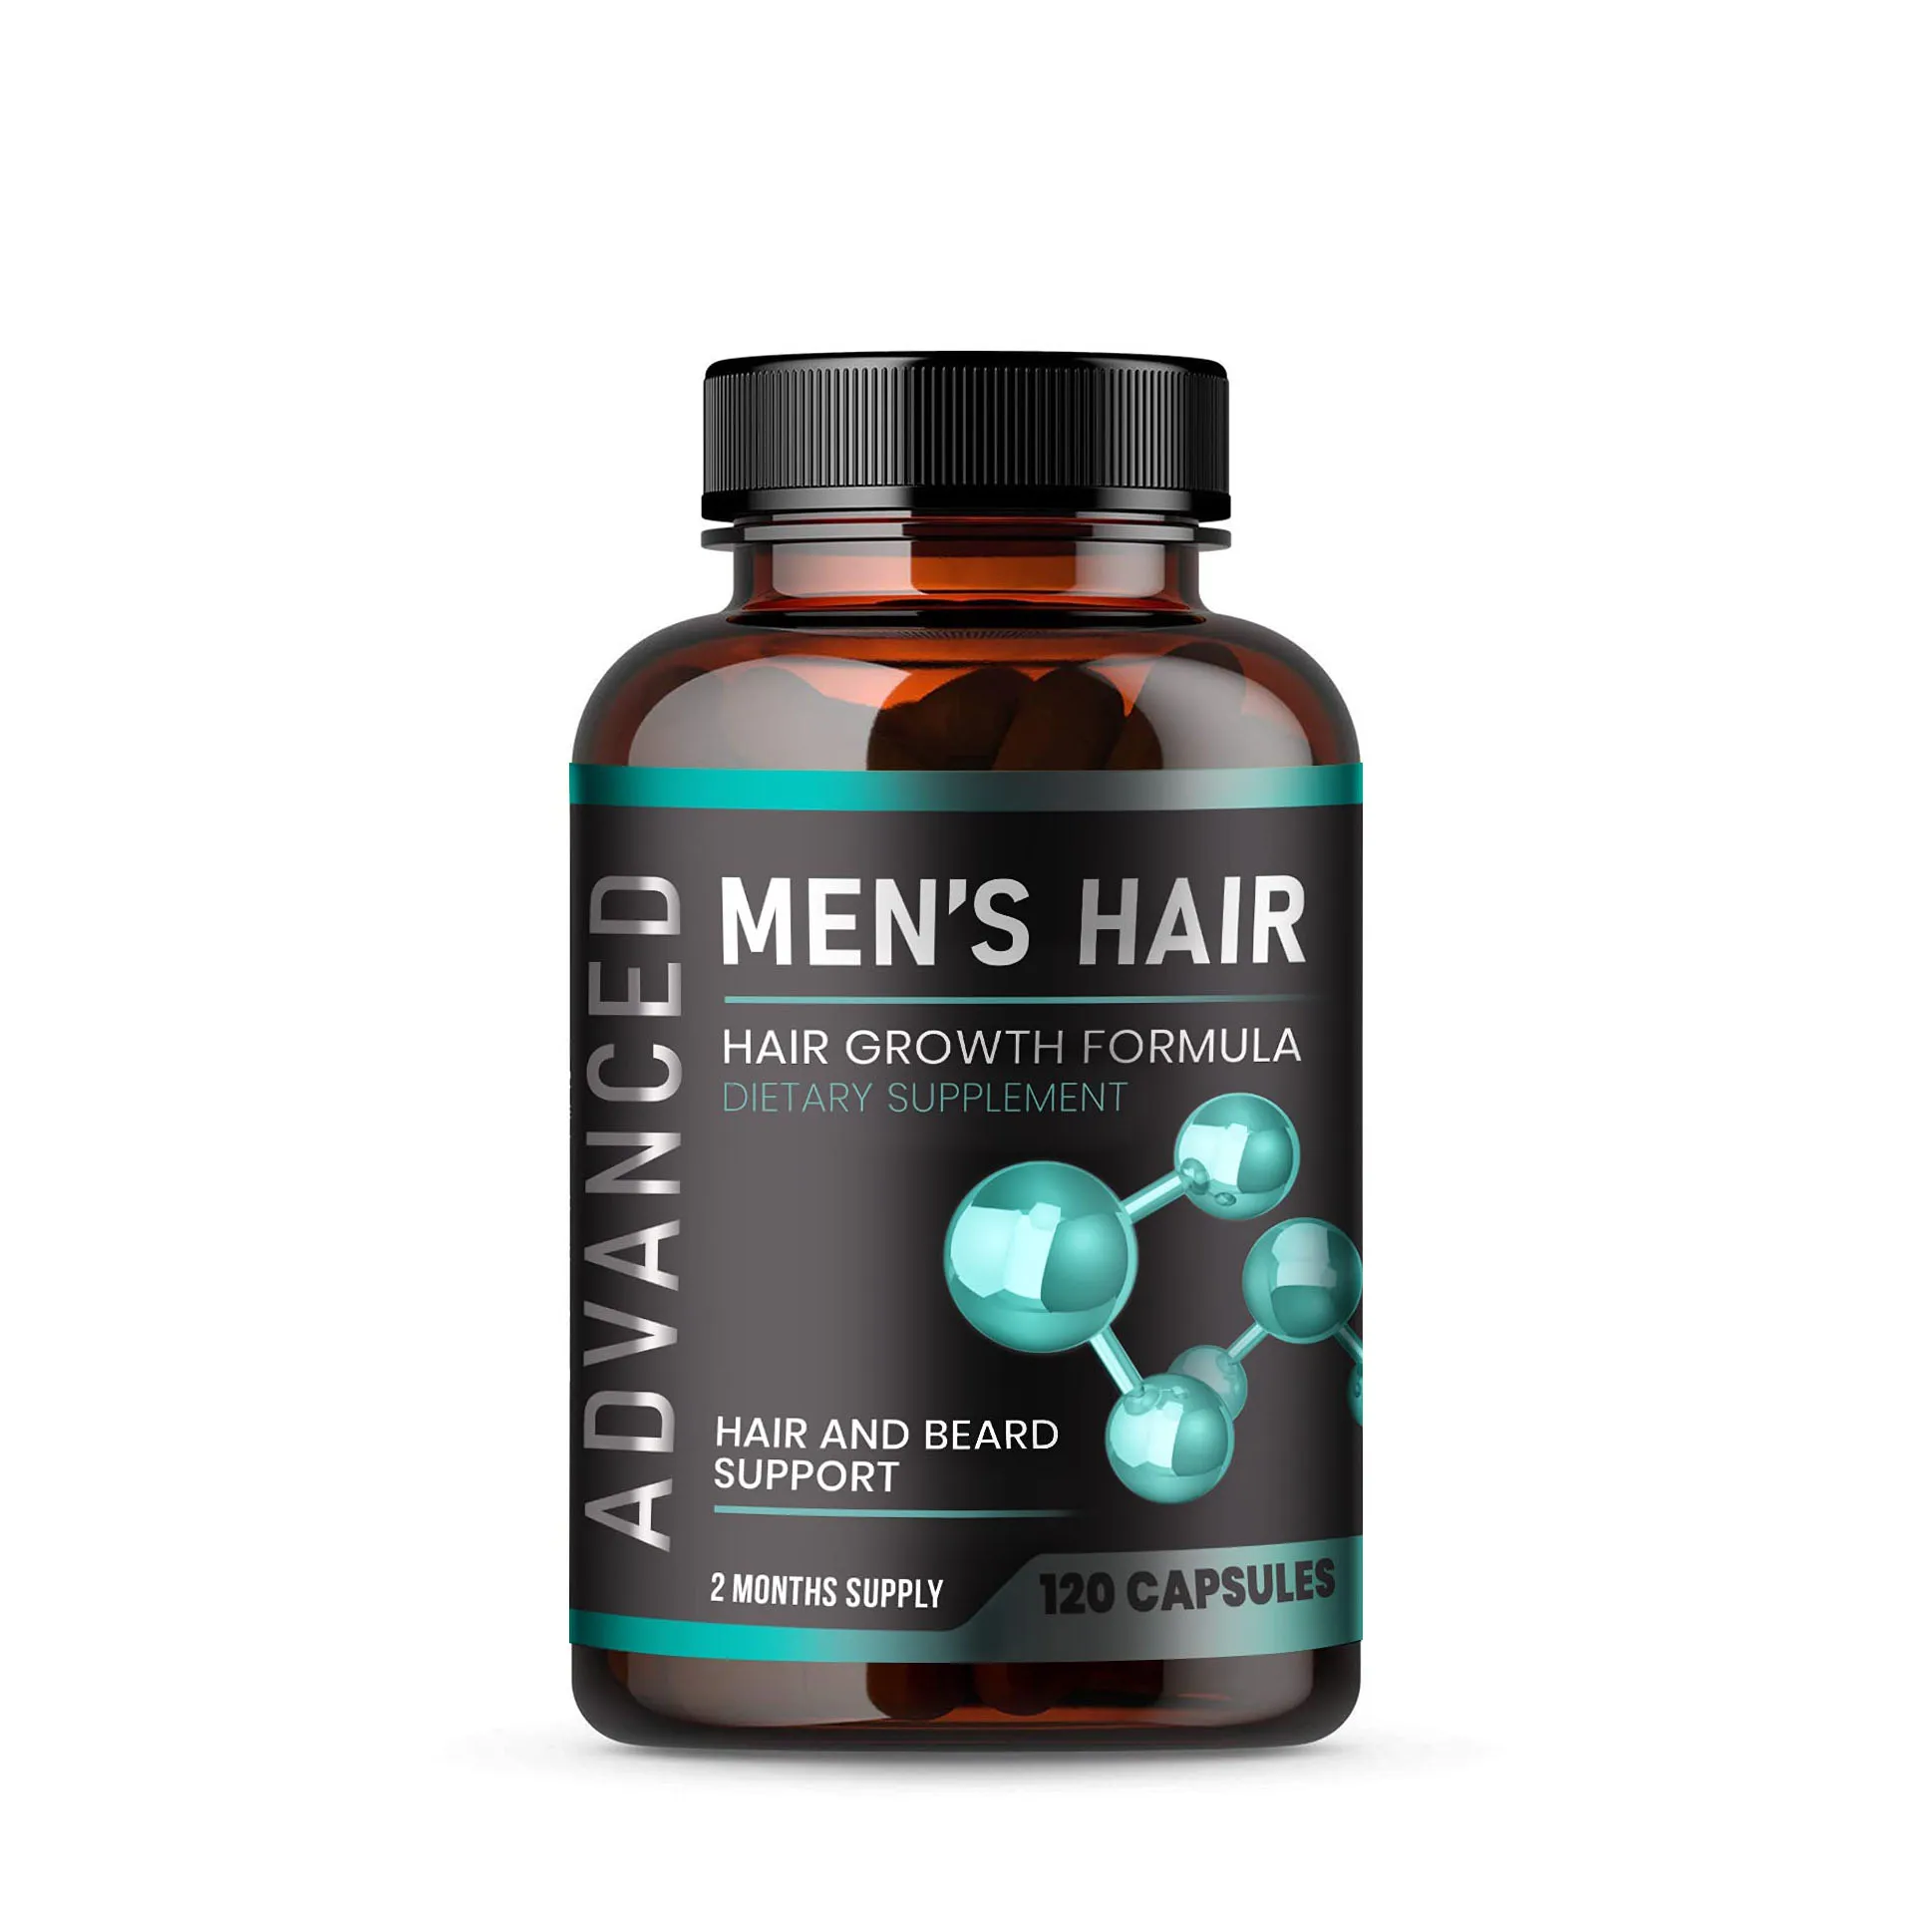 Hair Growth Vitamins For Men Regrow Hair & Beard Growth Supplement For  Volumize Thicker With Biotin & Saw Palmetto 120 Capsules - Buy Hair Growth  For Men,Hair Vitamins,Hair Vitamin Capsules Product on